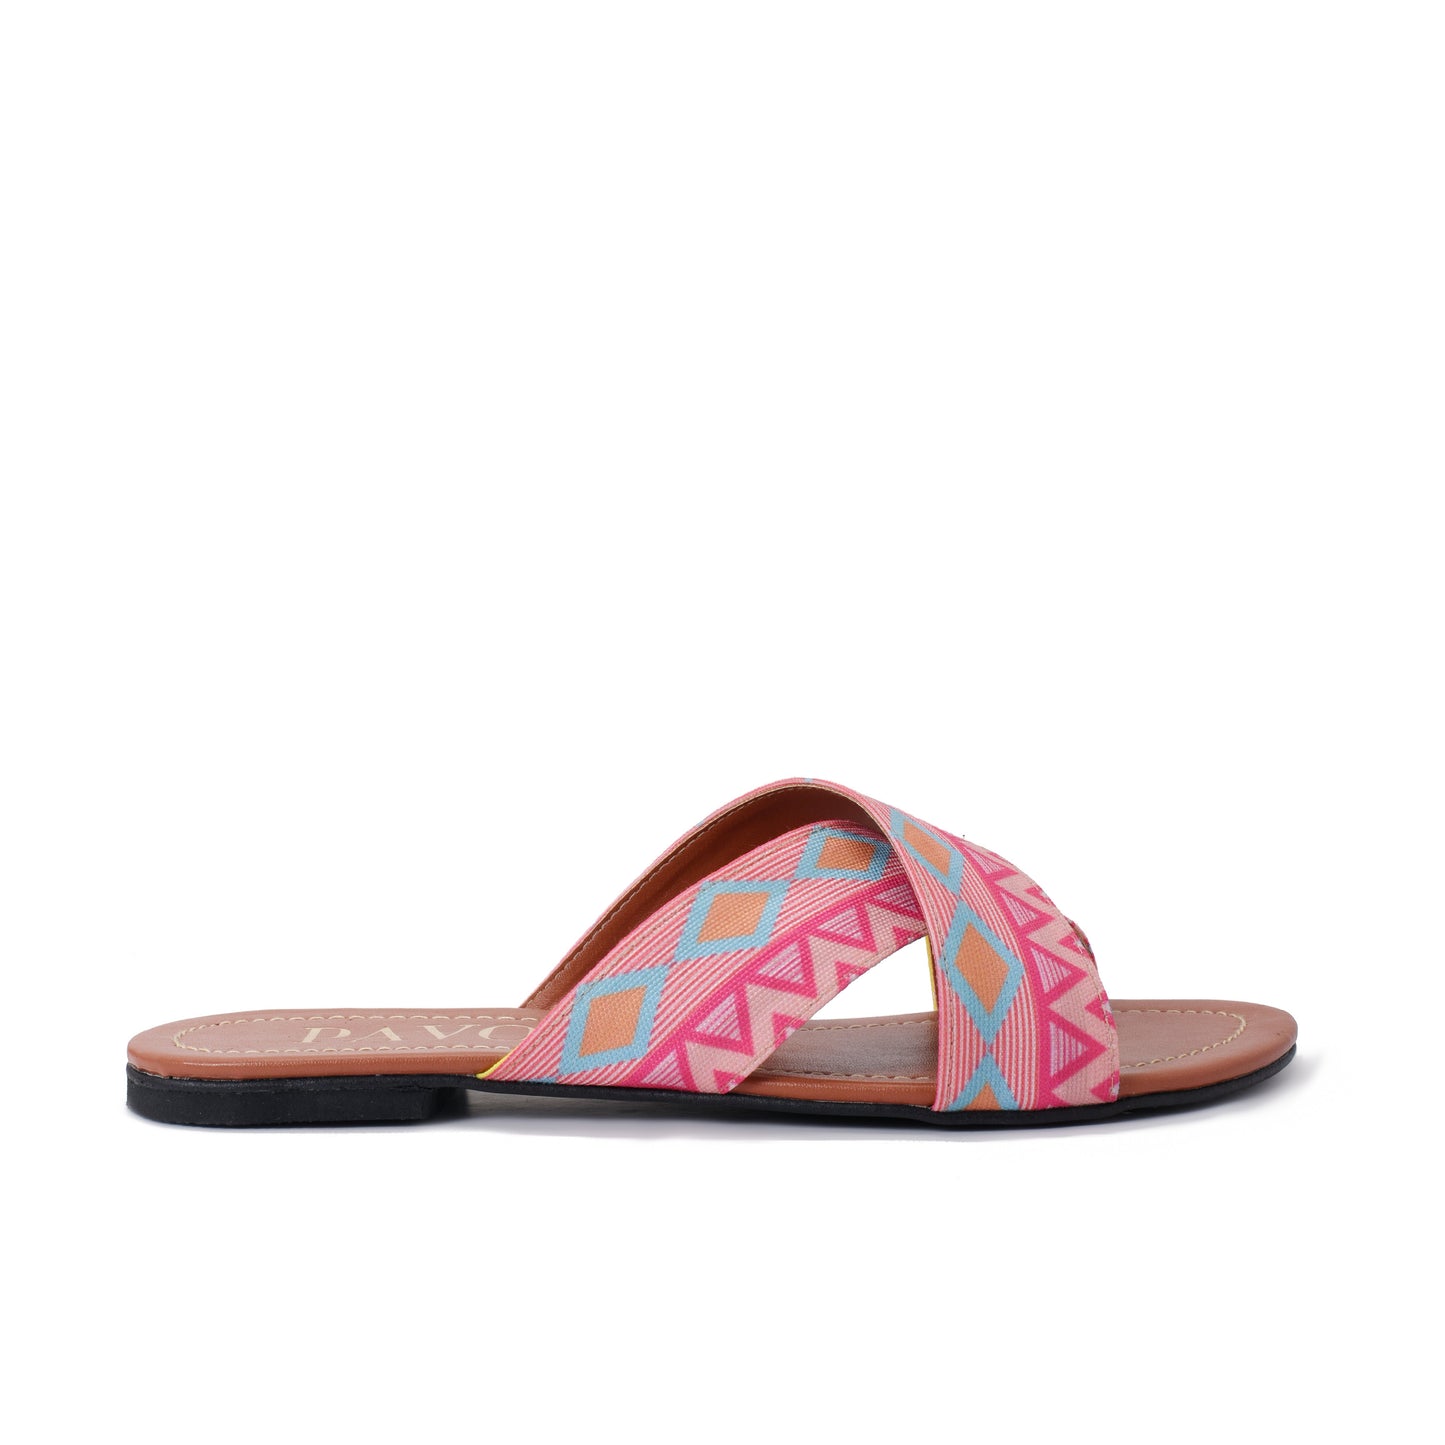 Coral cross Slippers - Code 5002